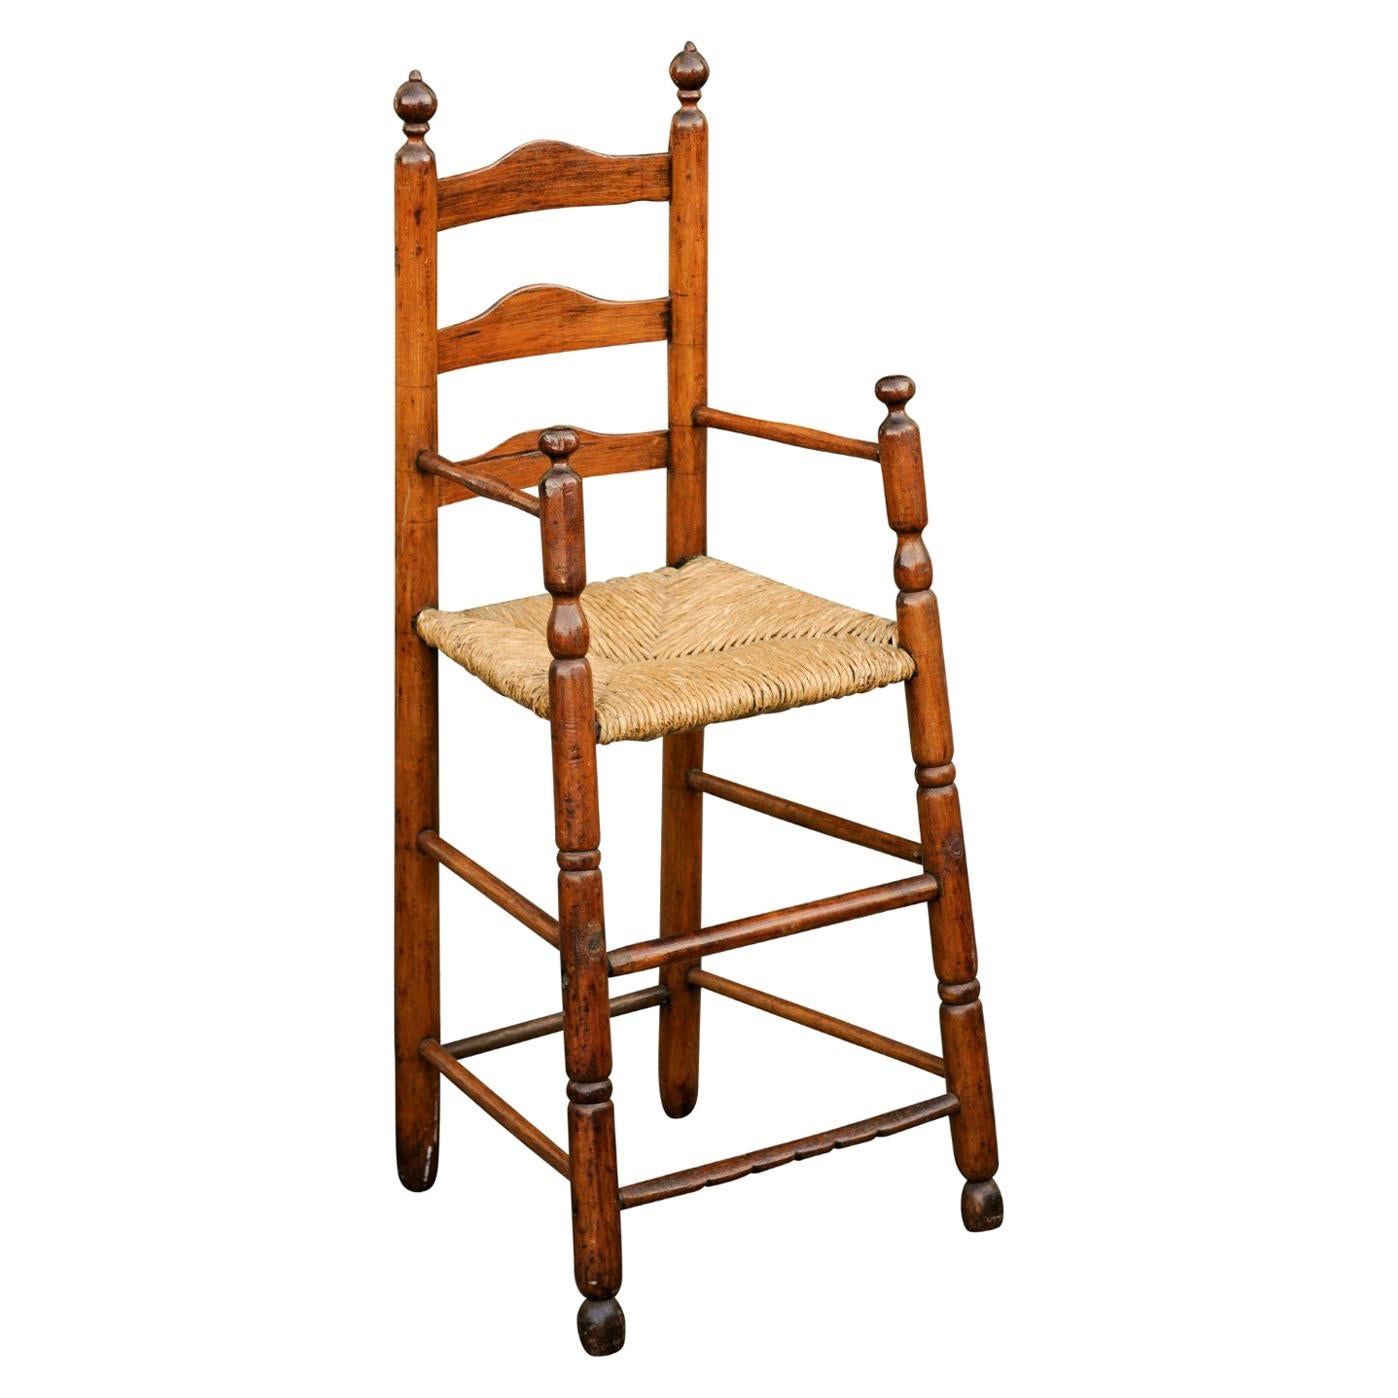 American Rustic Pine Child's High Chair with Rush Seat, Early 20th Century